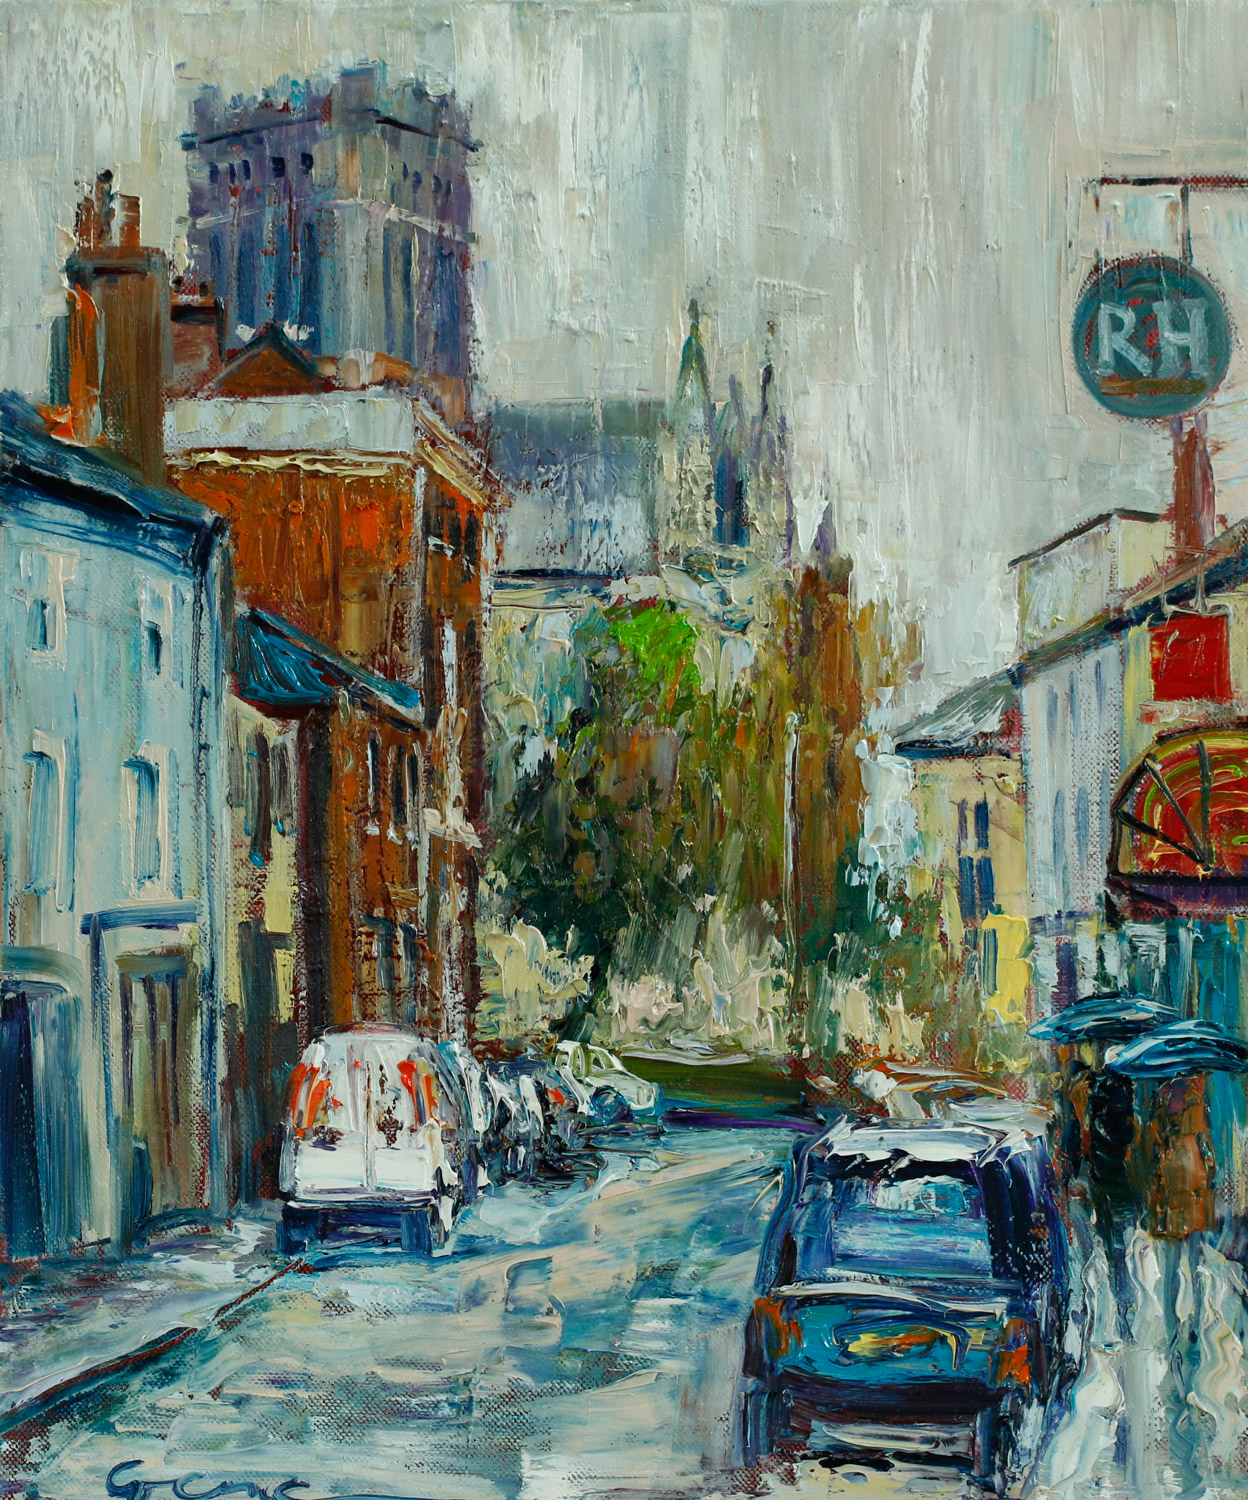 Artist Gennadiy Ivanov - Umbrella Day, Upper St Giles, £600 16x20 Oil on Canvas at Paint Out Norwich 2015